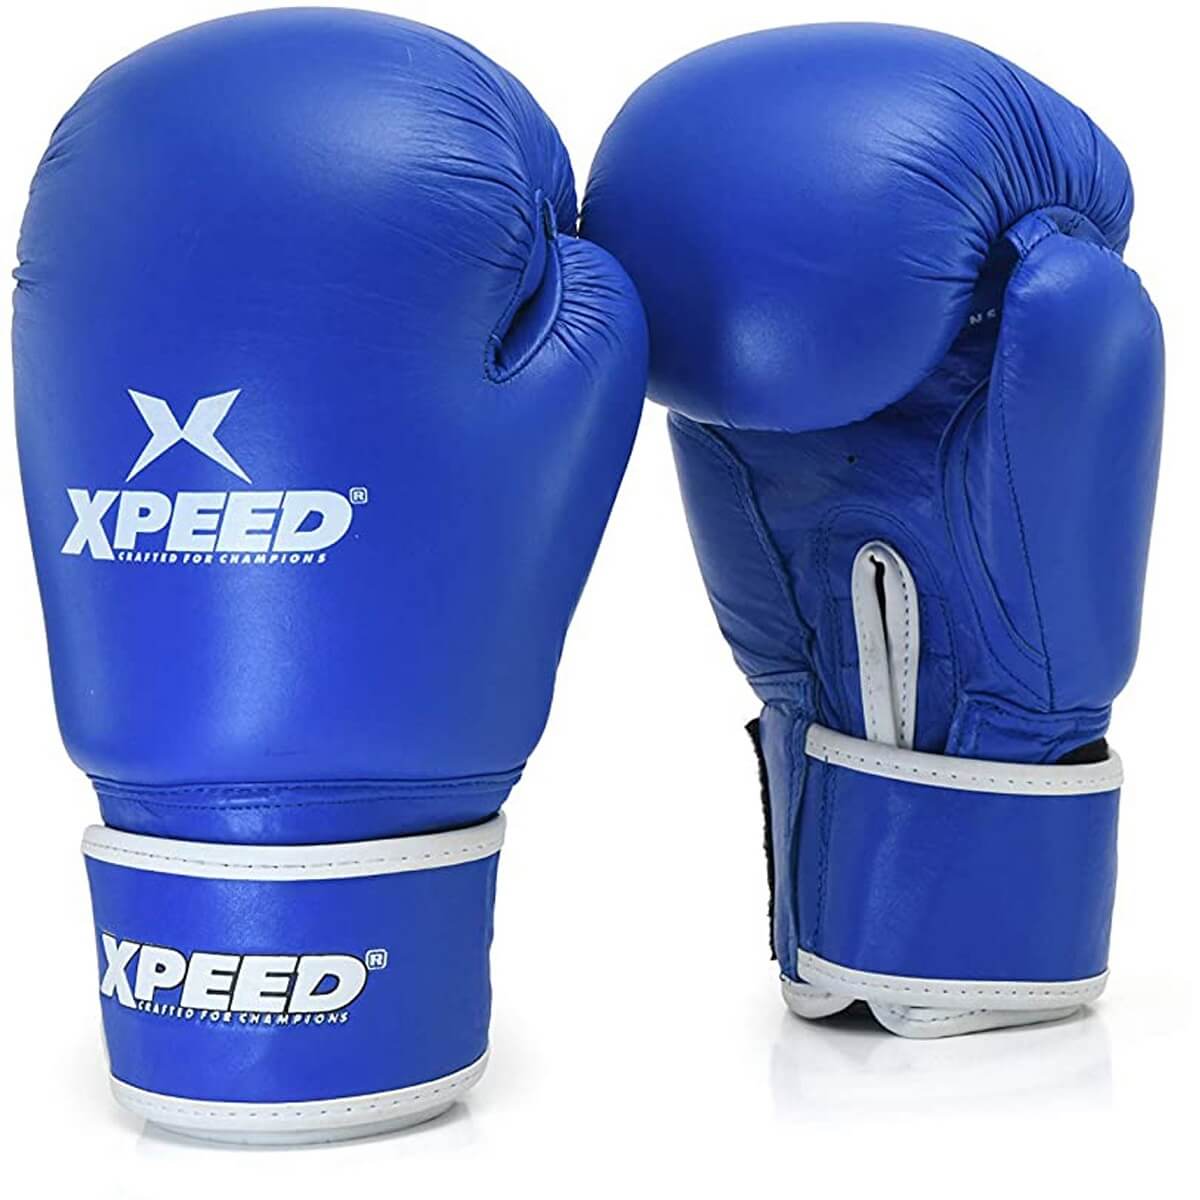 Xpeed Xp101 Contest boxing Gloves (Blue)